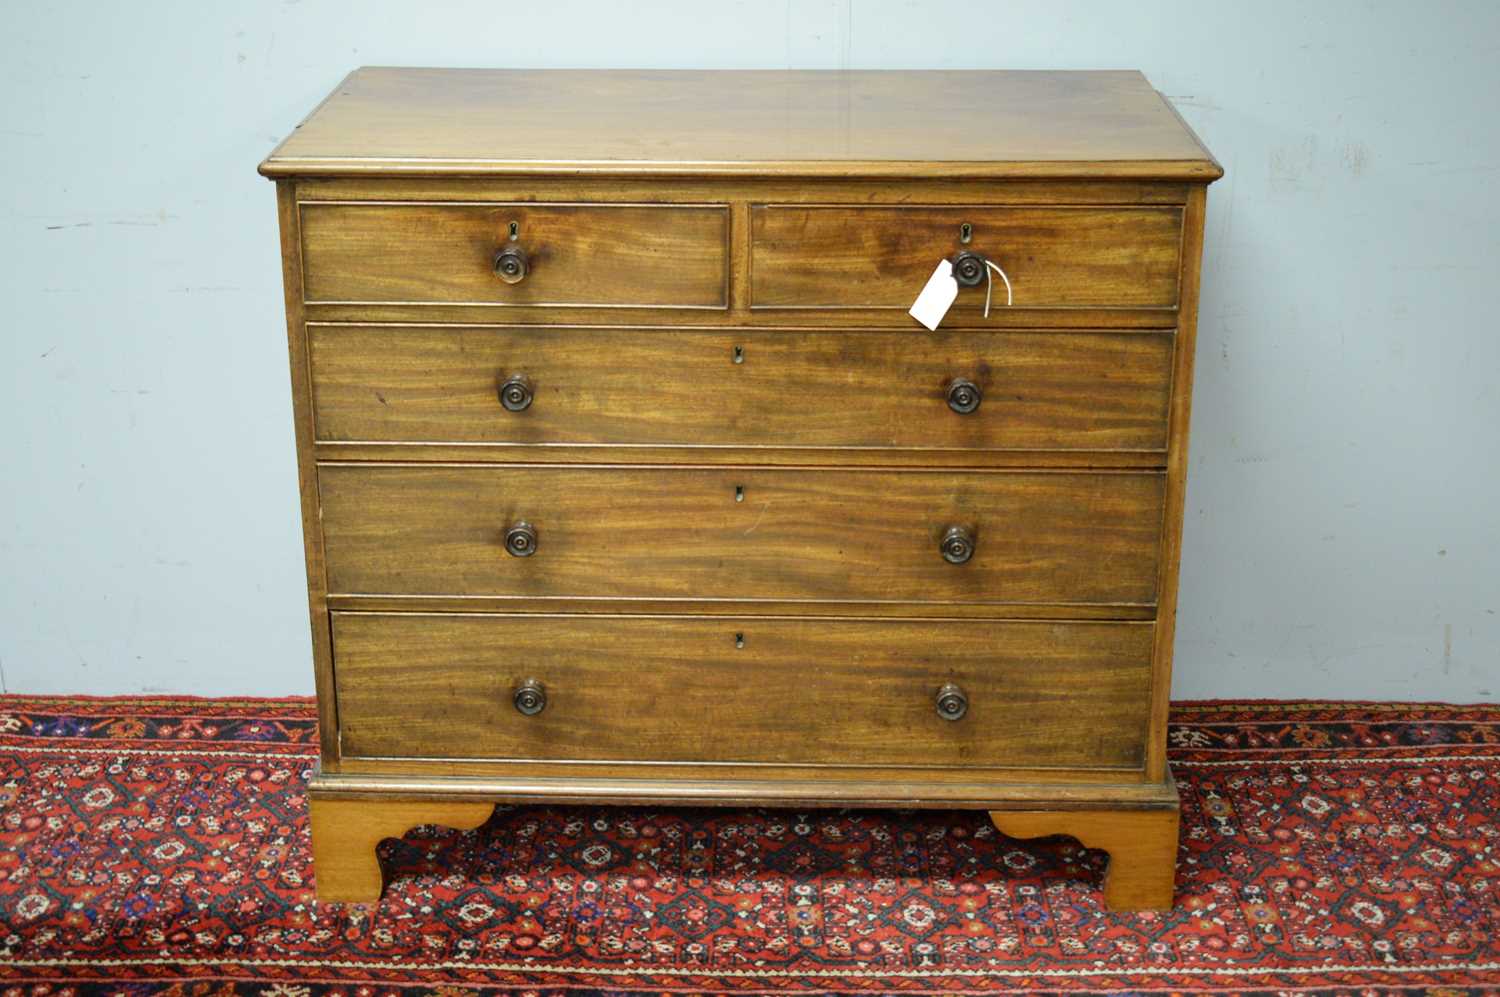 Lot 28 - 19th C mahogany chest of drawers.